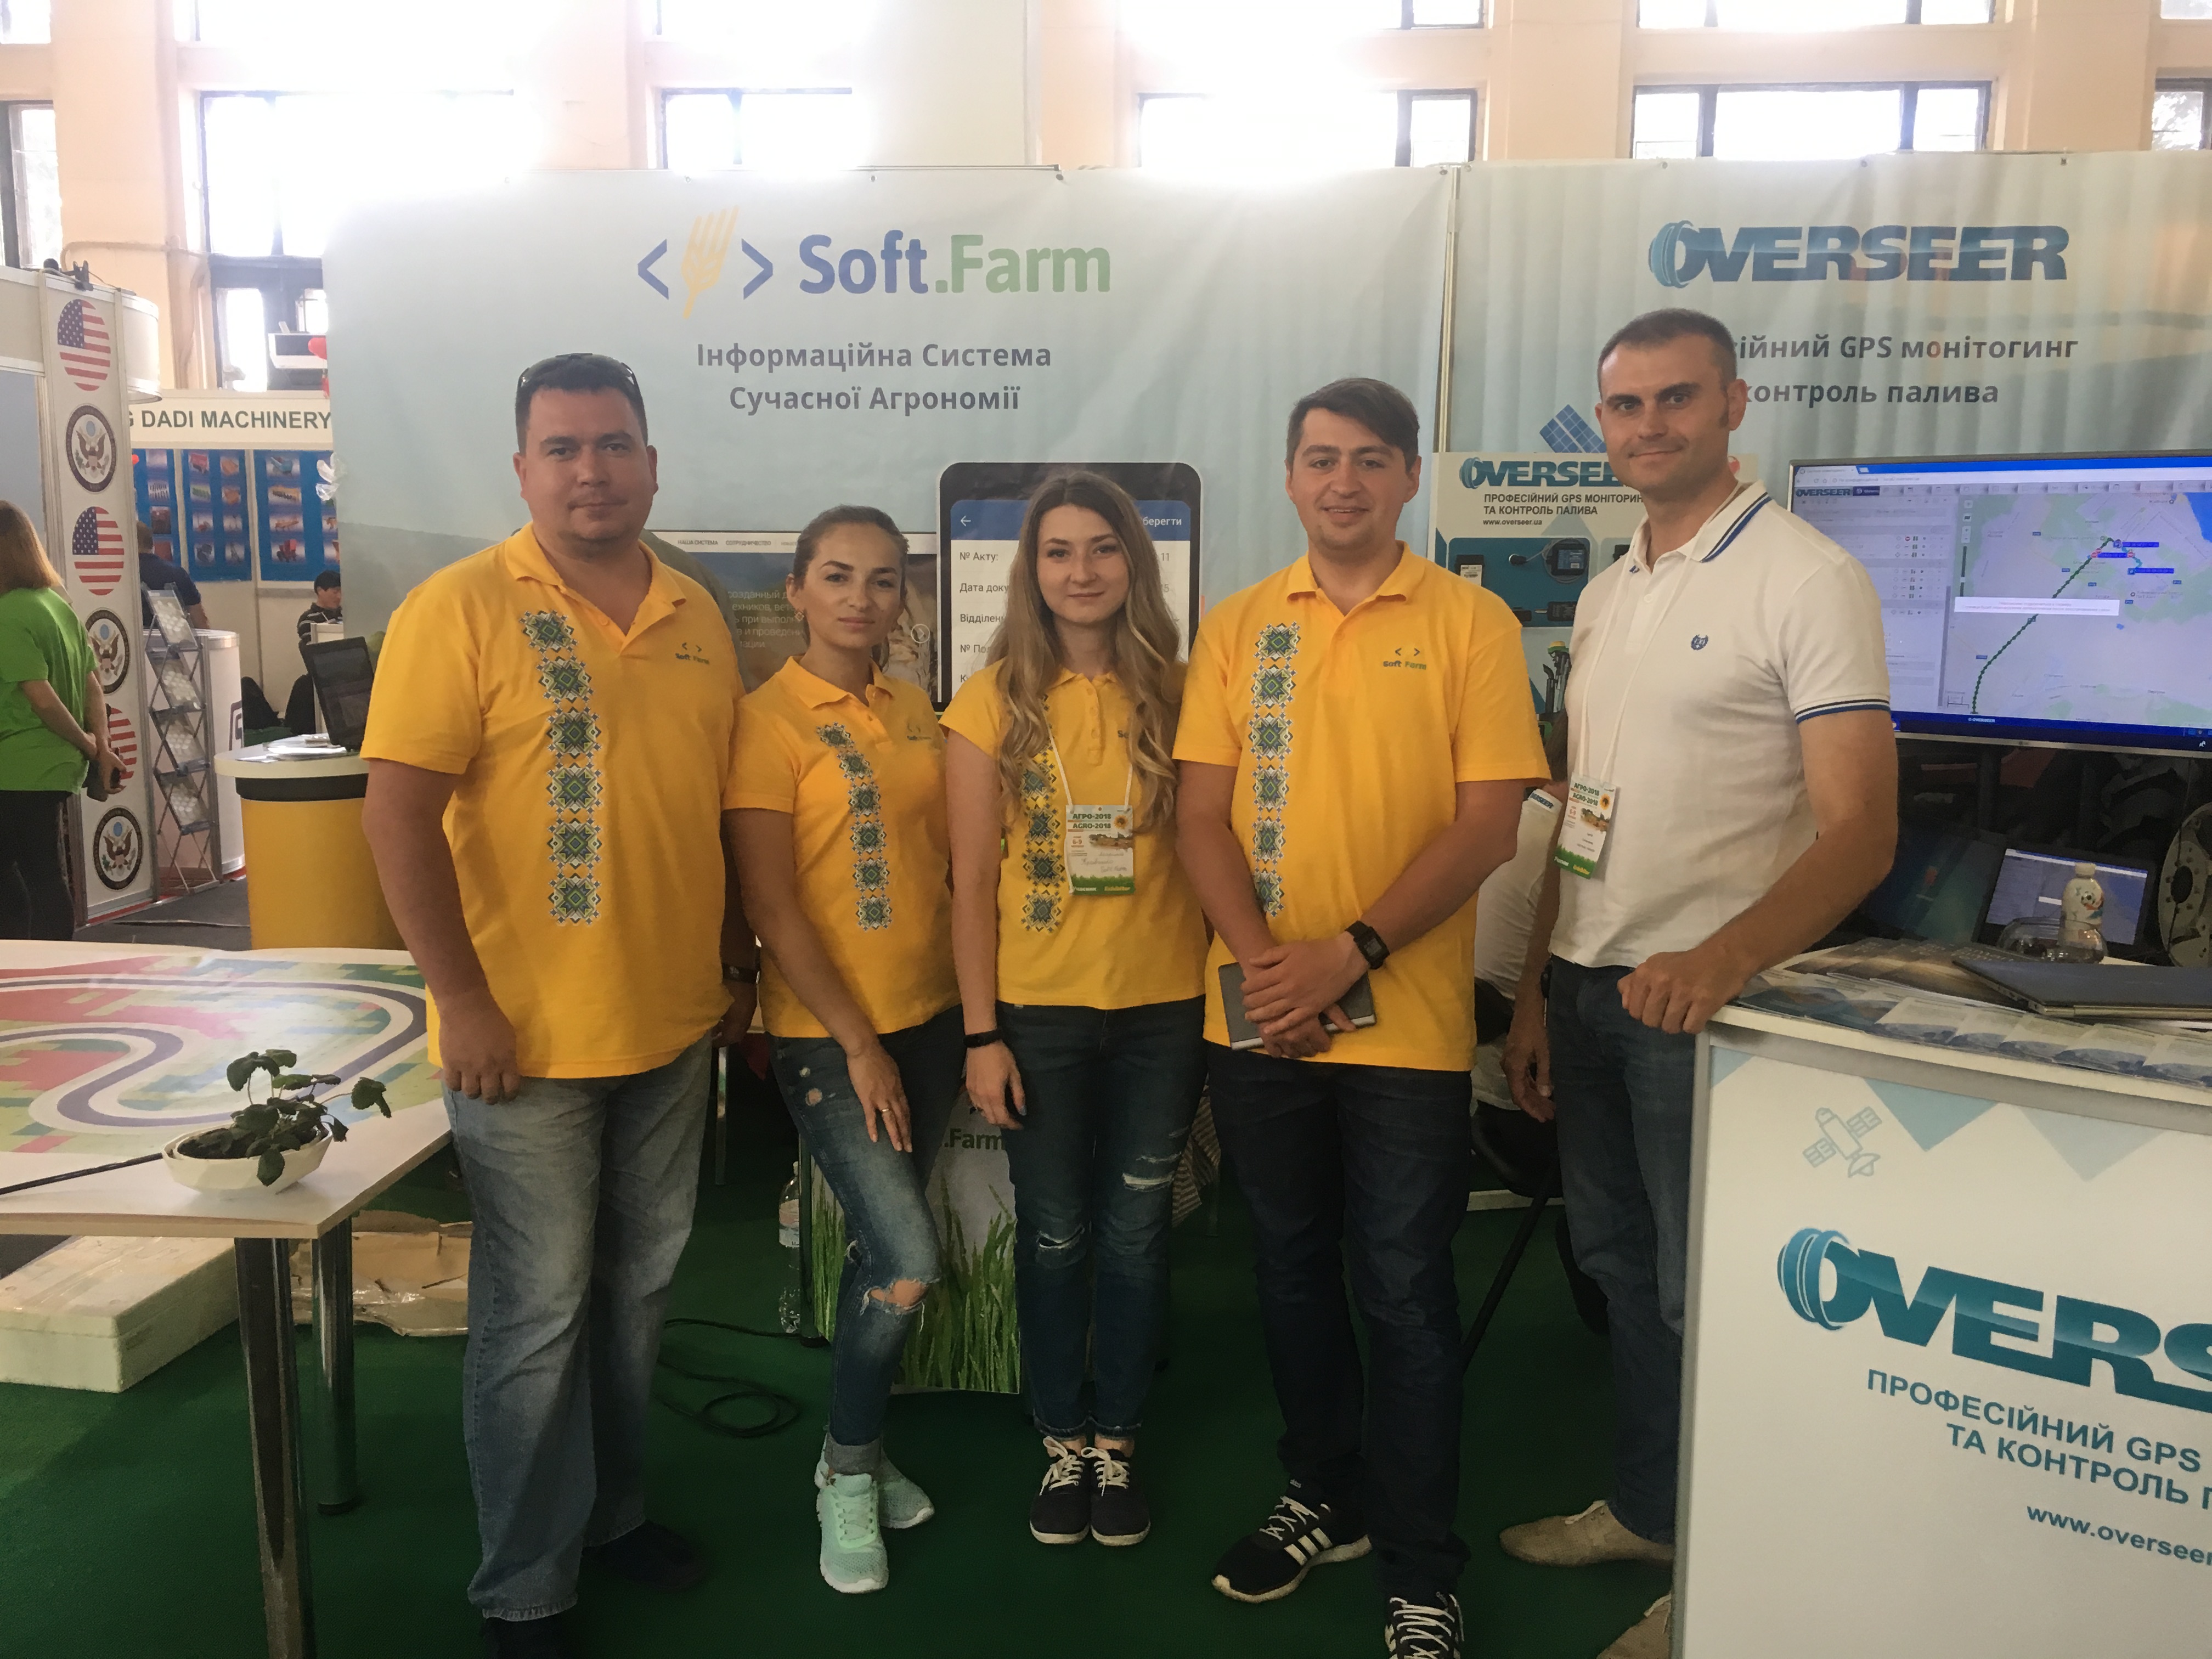 Soft.Farm team took part in the exhibition AGRO-2018